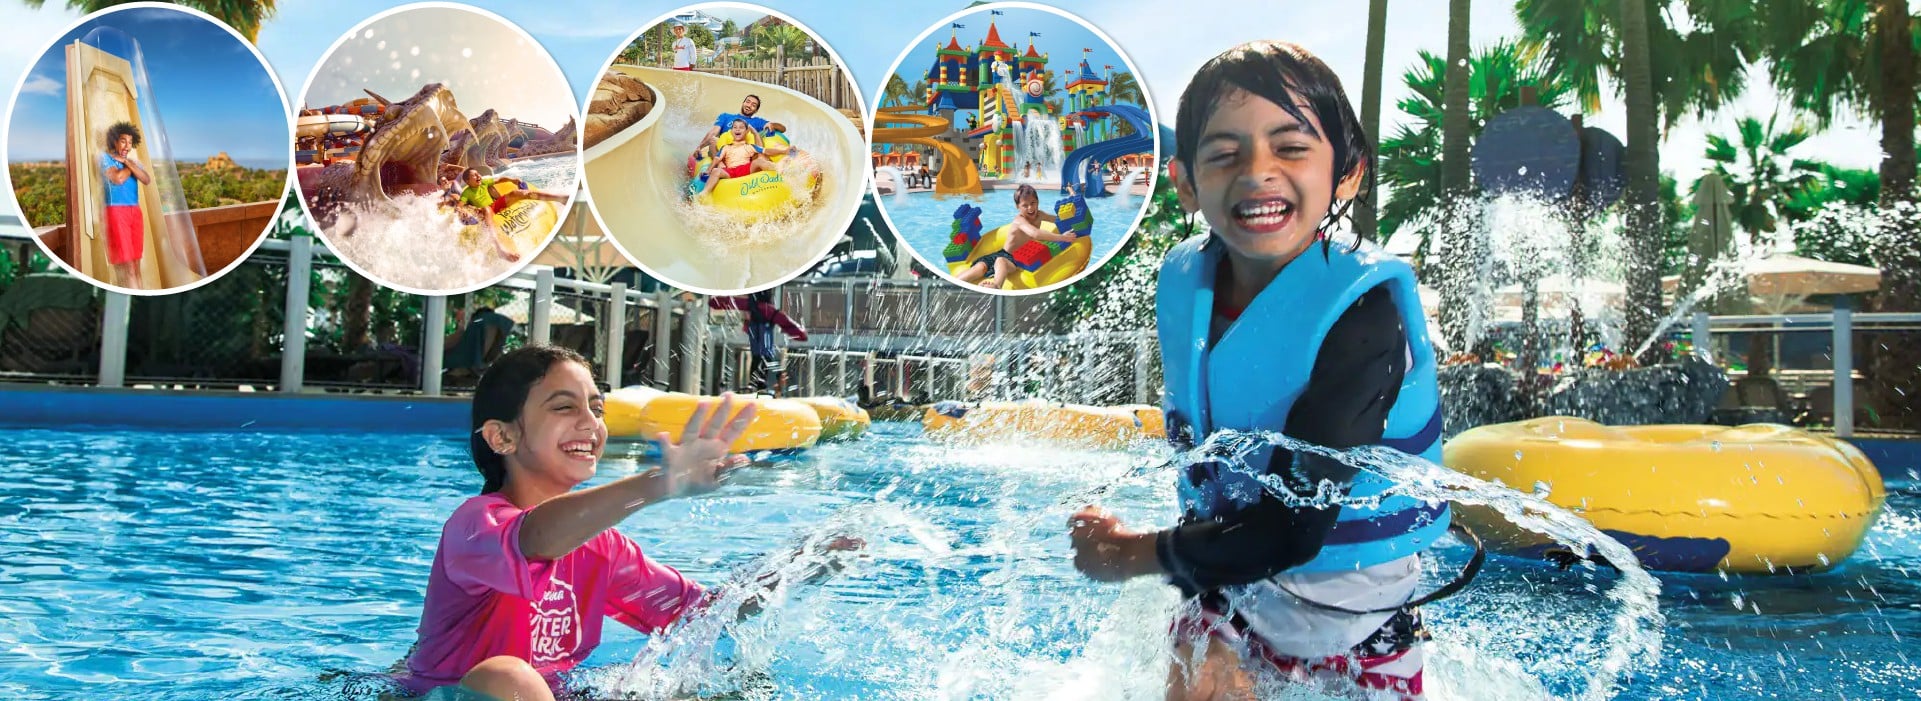 Water fun in Dubai with all other water activities for kids and family